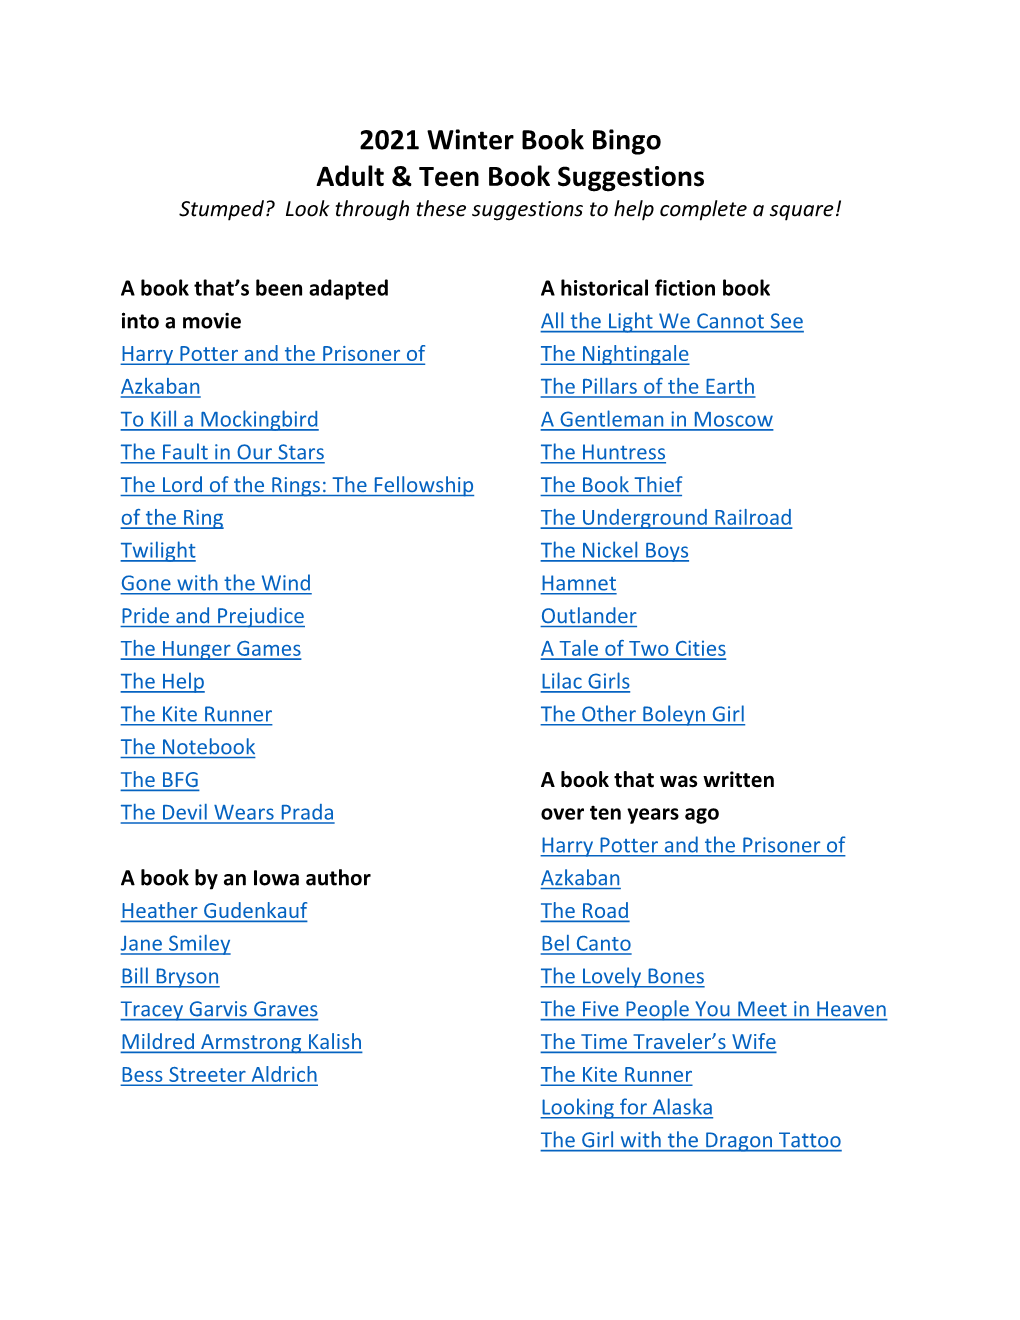 Teen & Adult Book Suggestions